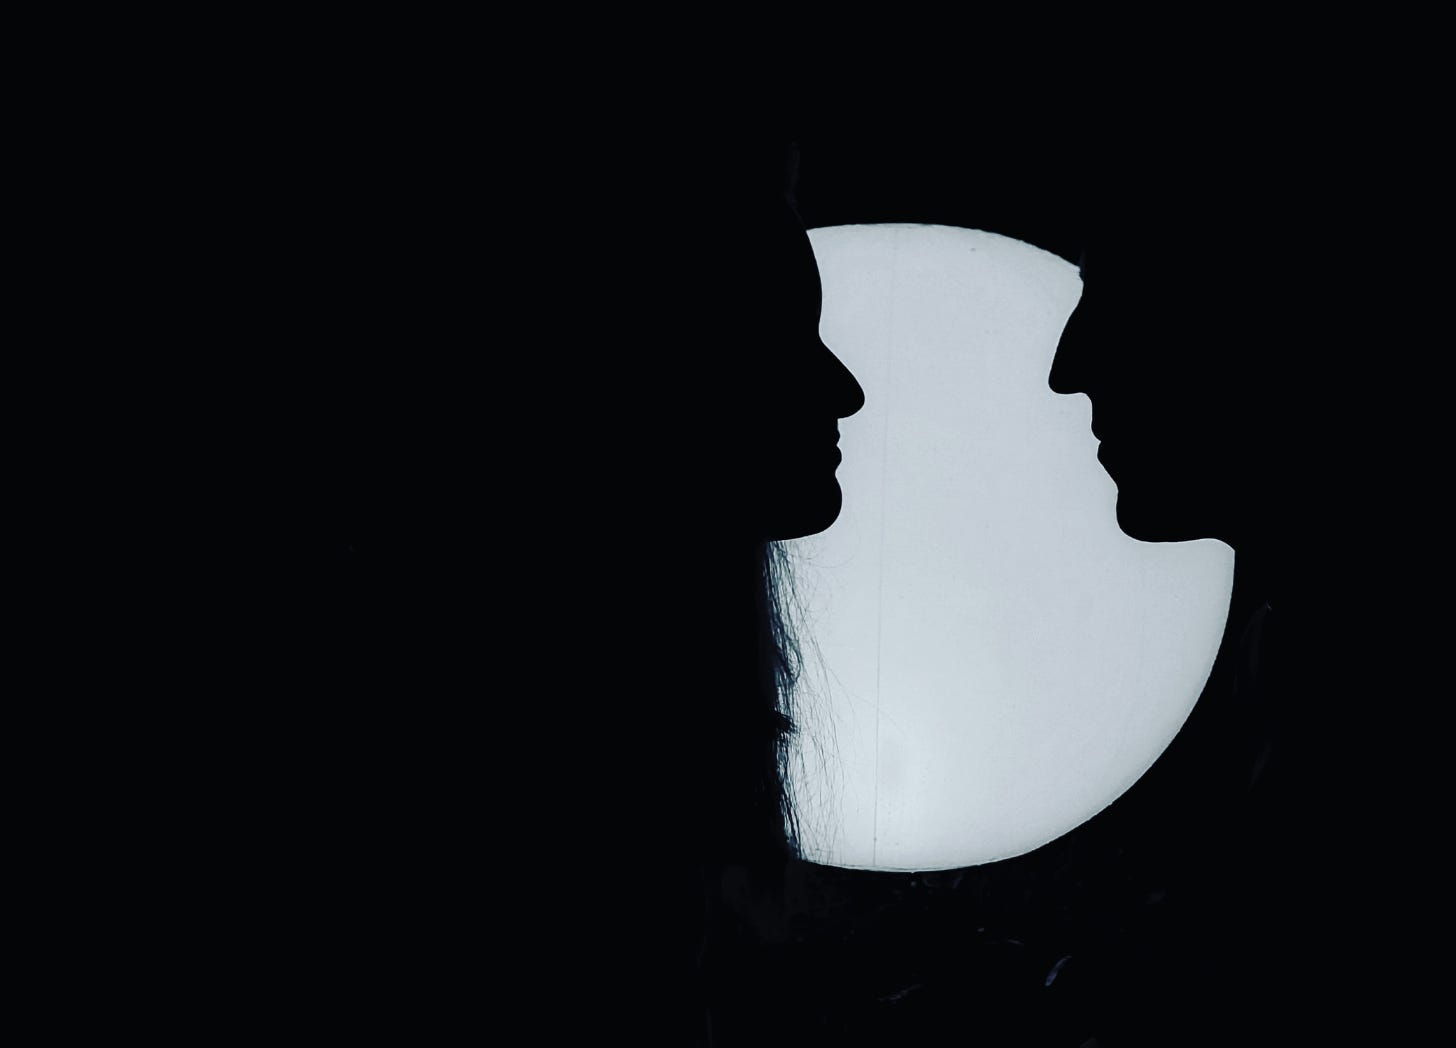 Silhouettes of a man and a woman facing each other 